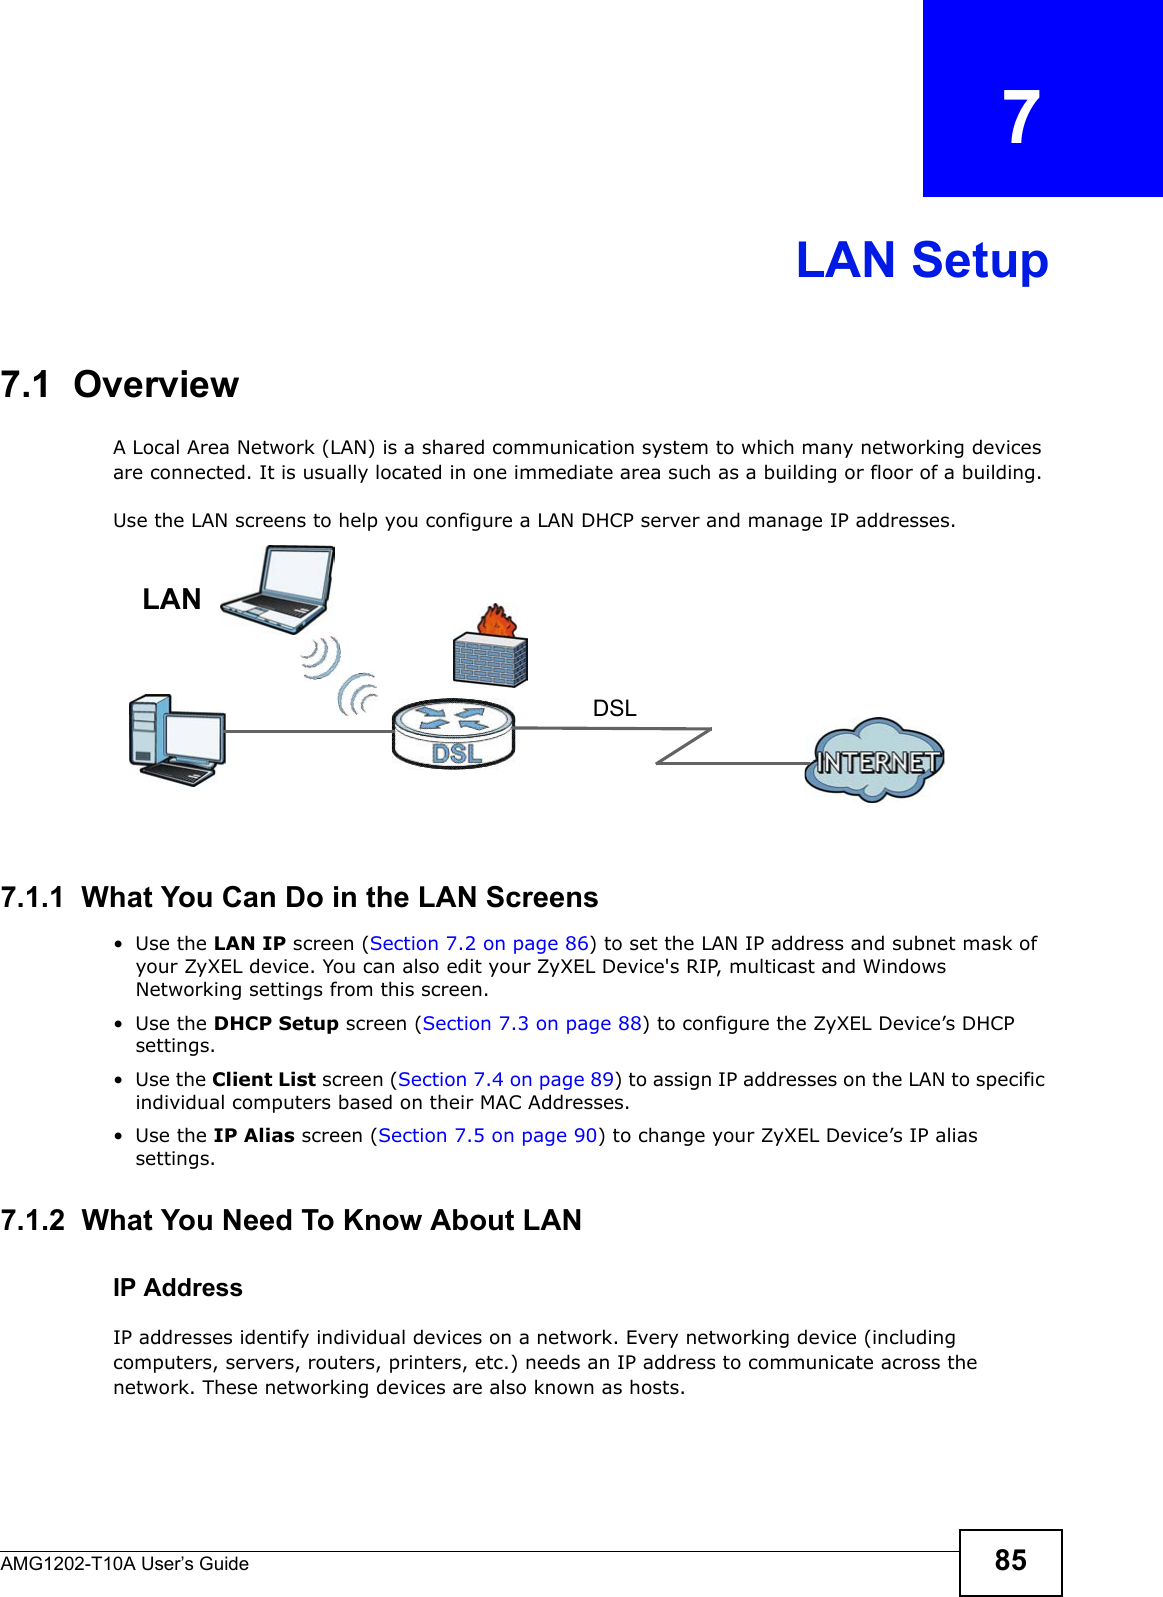 AMG1202-T10A User’s Guide 85CHAPTER   7LAN Setup7.1  OverviewA Local Area Network (LAN) is a shared communication system to which many networking devices are connected. It is usually located in one immediate area such as a building or floor of a building.Use the LAN screens to help you configure a LAN DHCP server and manage IP addresses.7.1.1  What You Can Do in the LAN Screens•Use the LAN IP screen (Section 7.2 on page 86) to set the LAN IP address and subnet mask of your ZyXEL device. You can also edit your ZyXEL Device&apos;s RIP, multicast and Windows Networking settings from this screen.•Use the DHCP Setup screen (Section 7.3 on page 88) to configure the ZyXEL Device’s DHCP settings.•Use the Client List screen (Section 7.4 on page 89) to assign IP addresses on the LAN to specific individual computers based on their MAC Addresses. •Use the IP Alias screen (Section 7.5 on page 90) to change your ZyXEL Device’s IP alias settings.7.1.2  What You Need To Know About LANIP AddressIP addresses identify individual devices on a network. Every networking device (including computers, servers, routers, printers, etc.) needs an IP address to communicate across the network. These networking devices are also known as hosts.DSLLAN